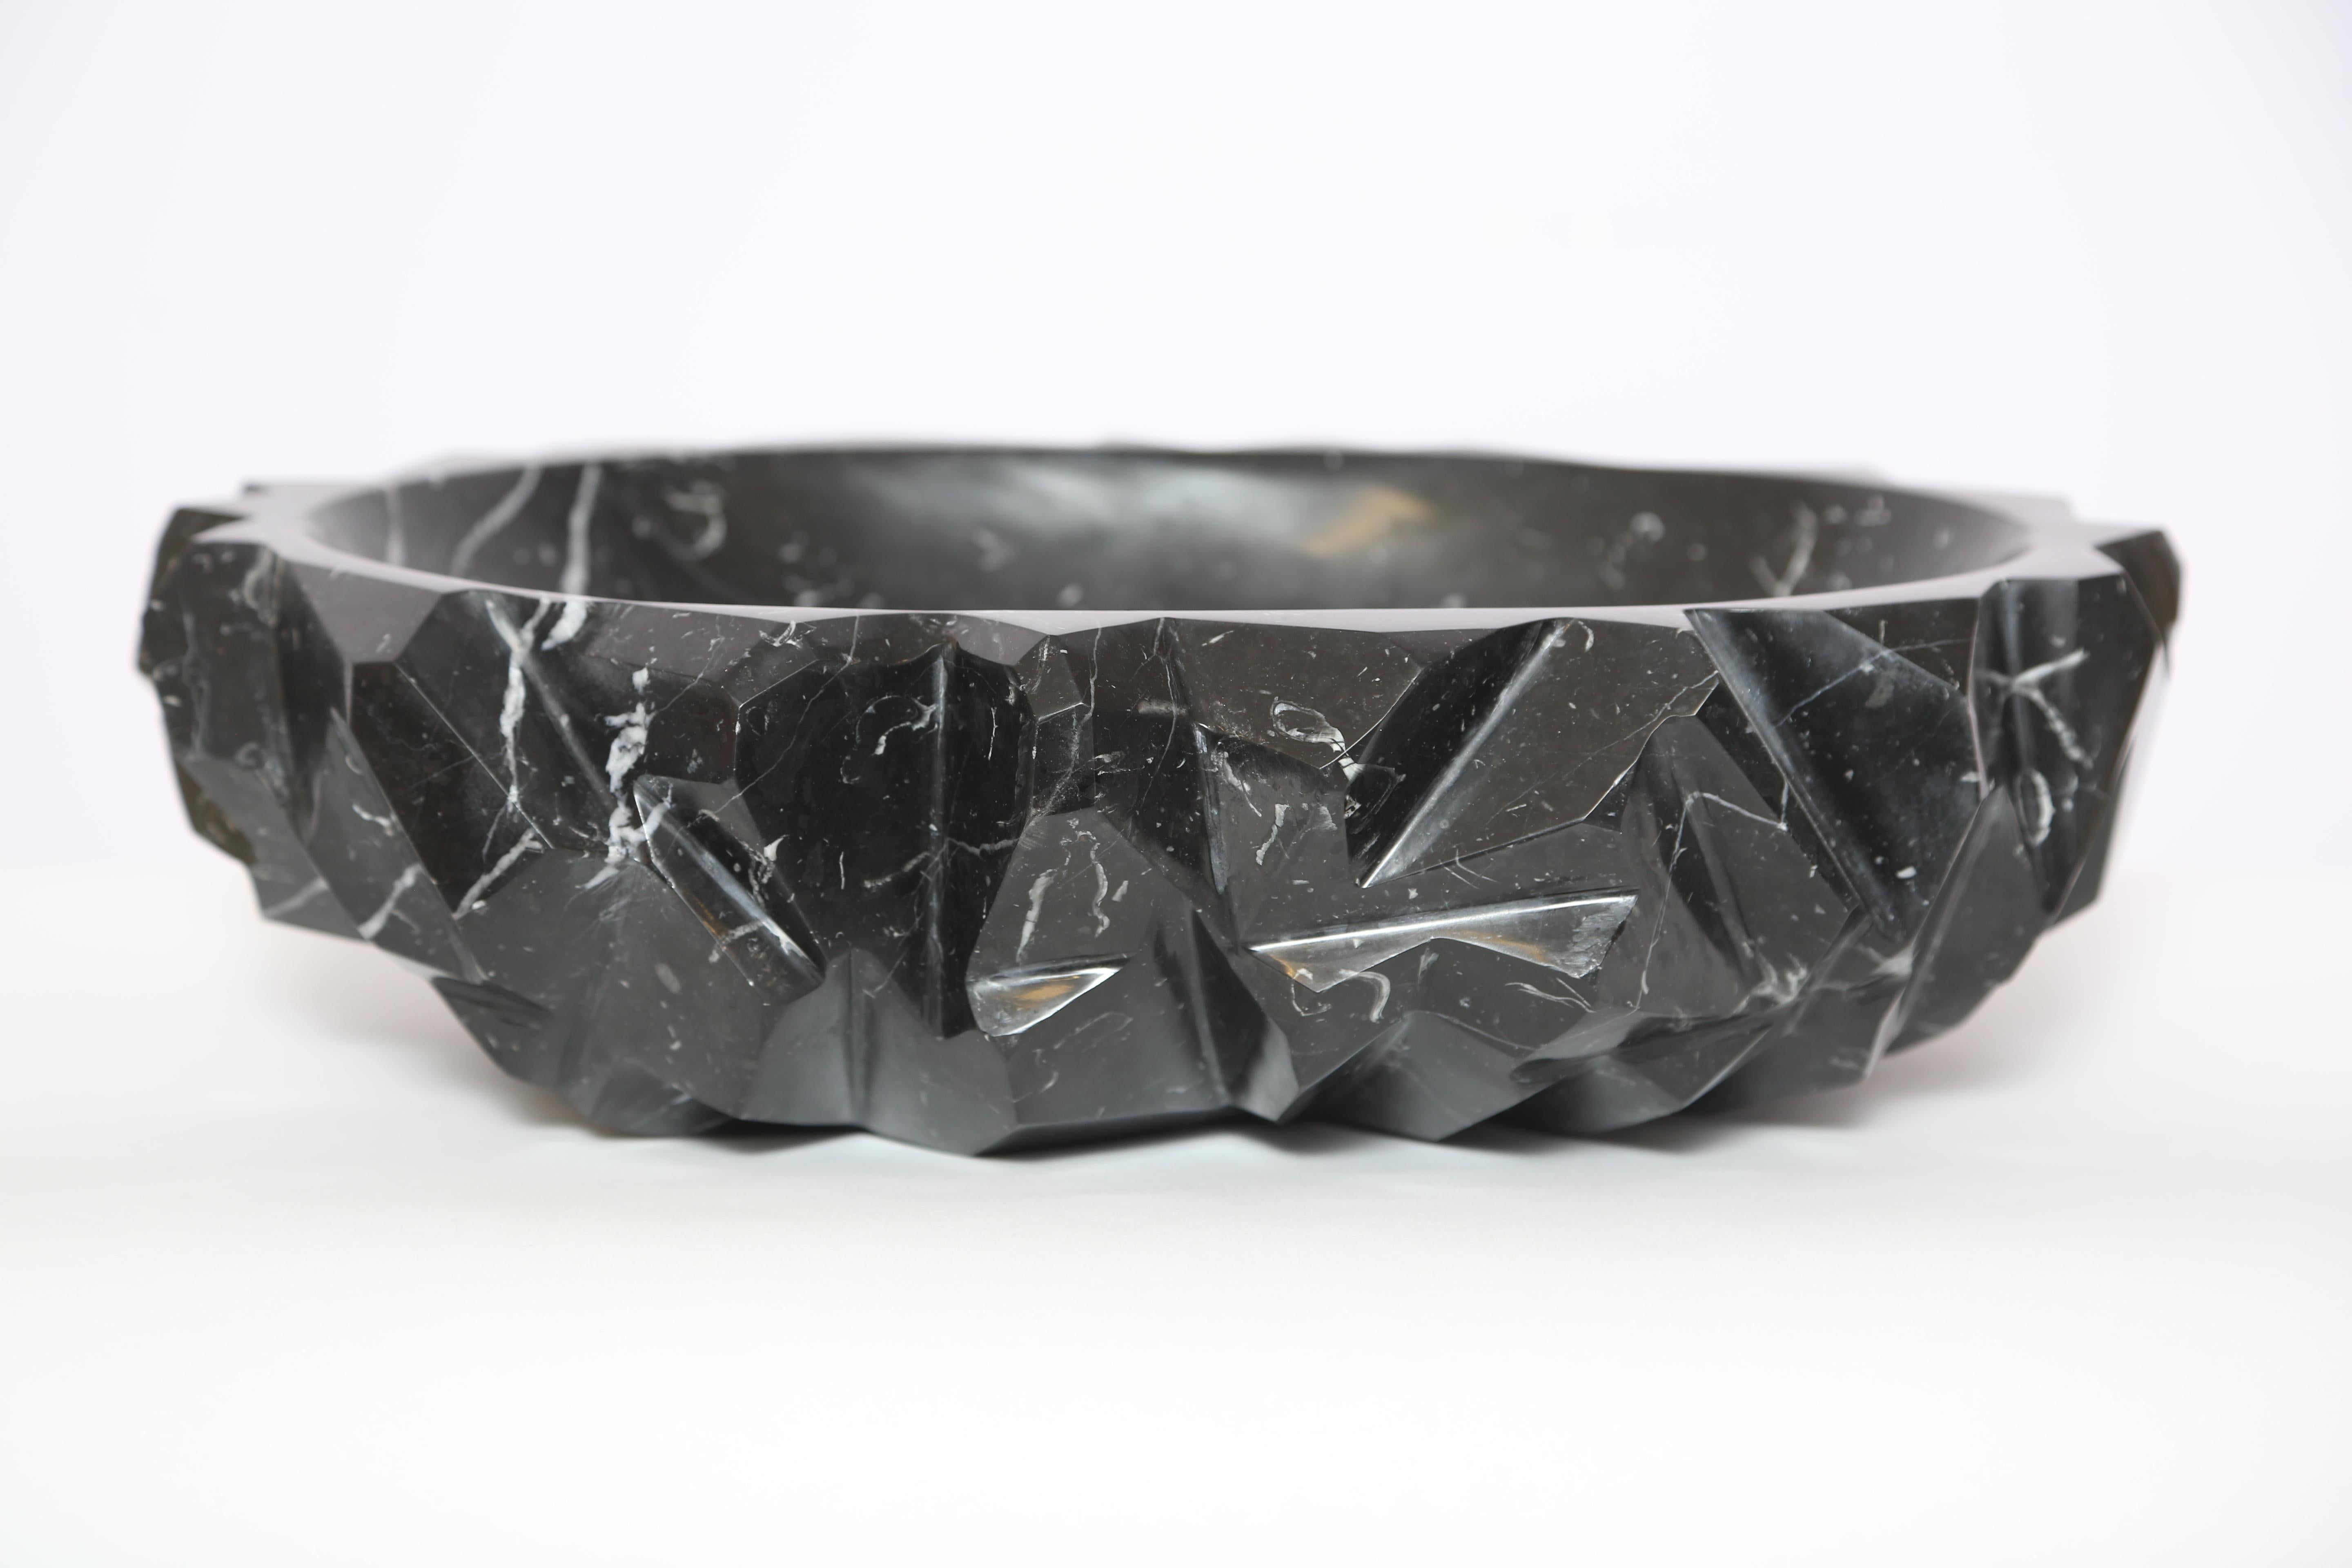 The Marble House Rock Bowl in Black Marquina Marble, Handmade in Italy (Handgefertigt)